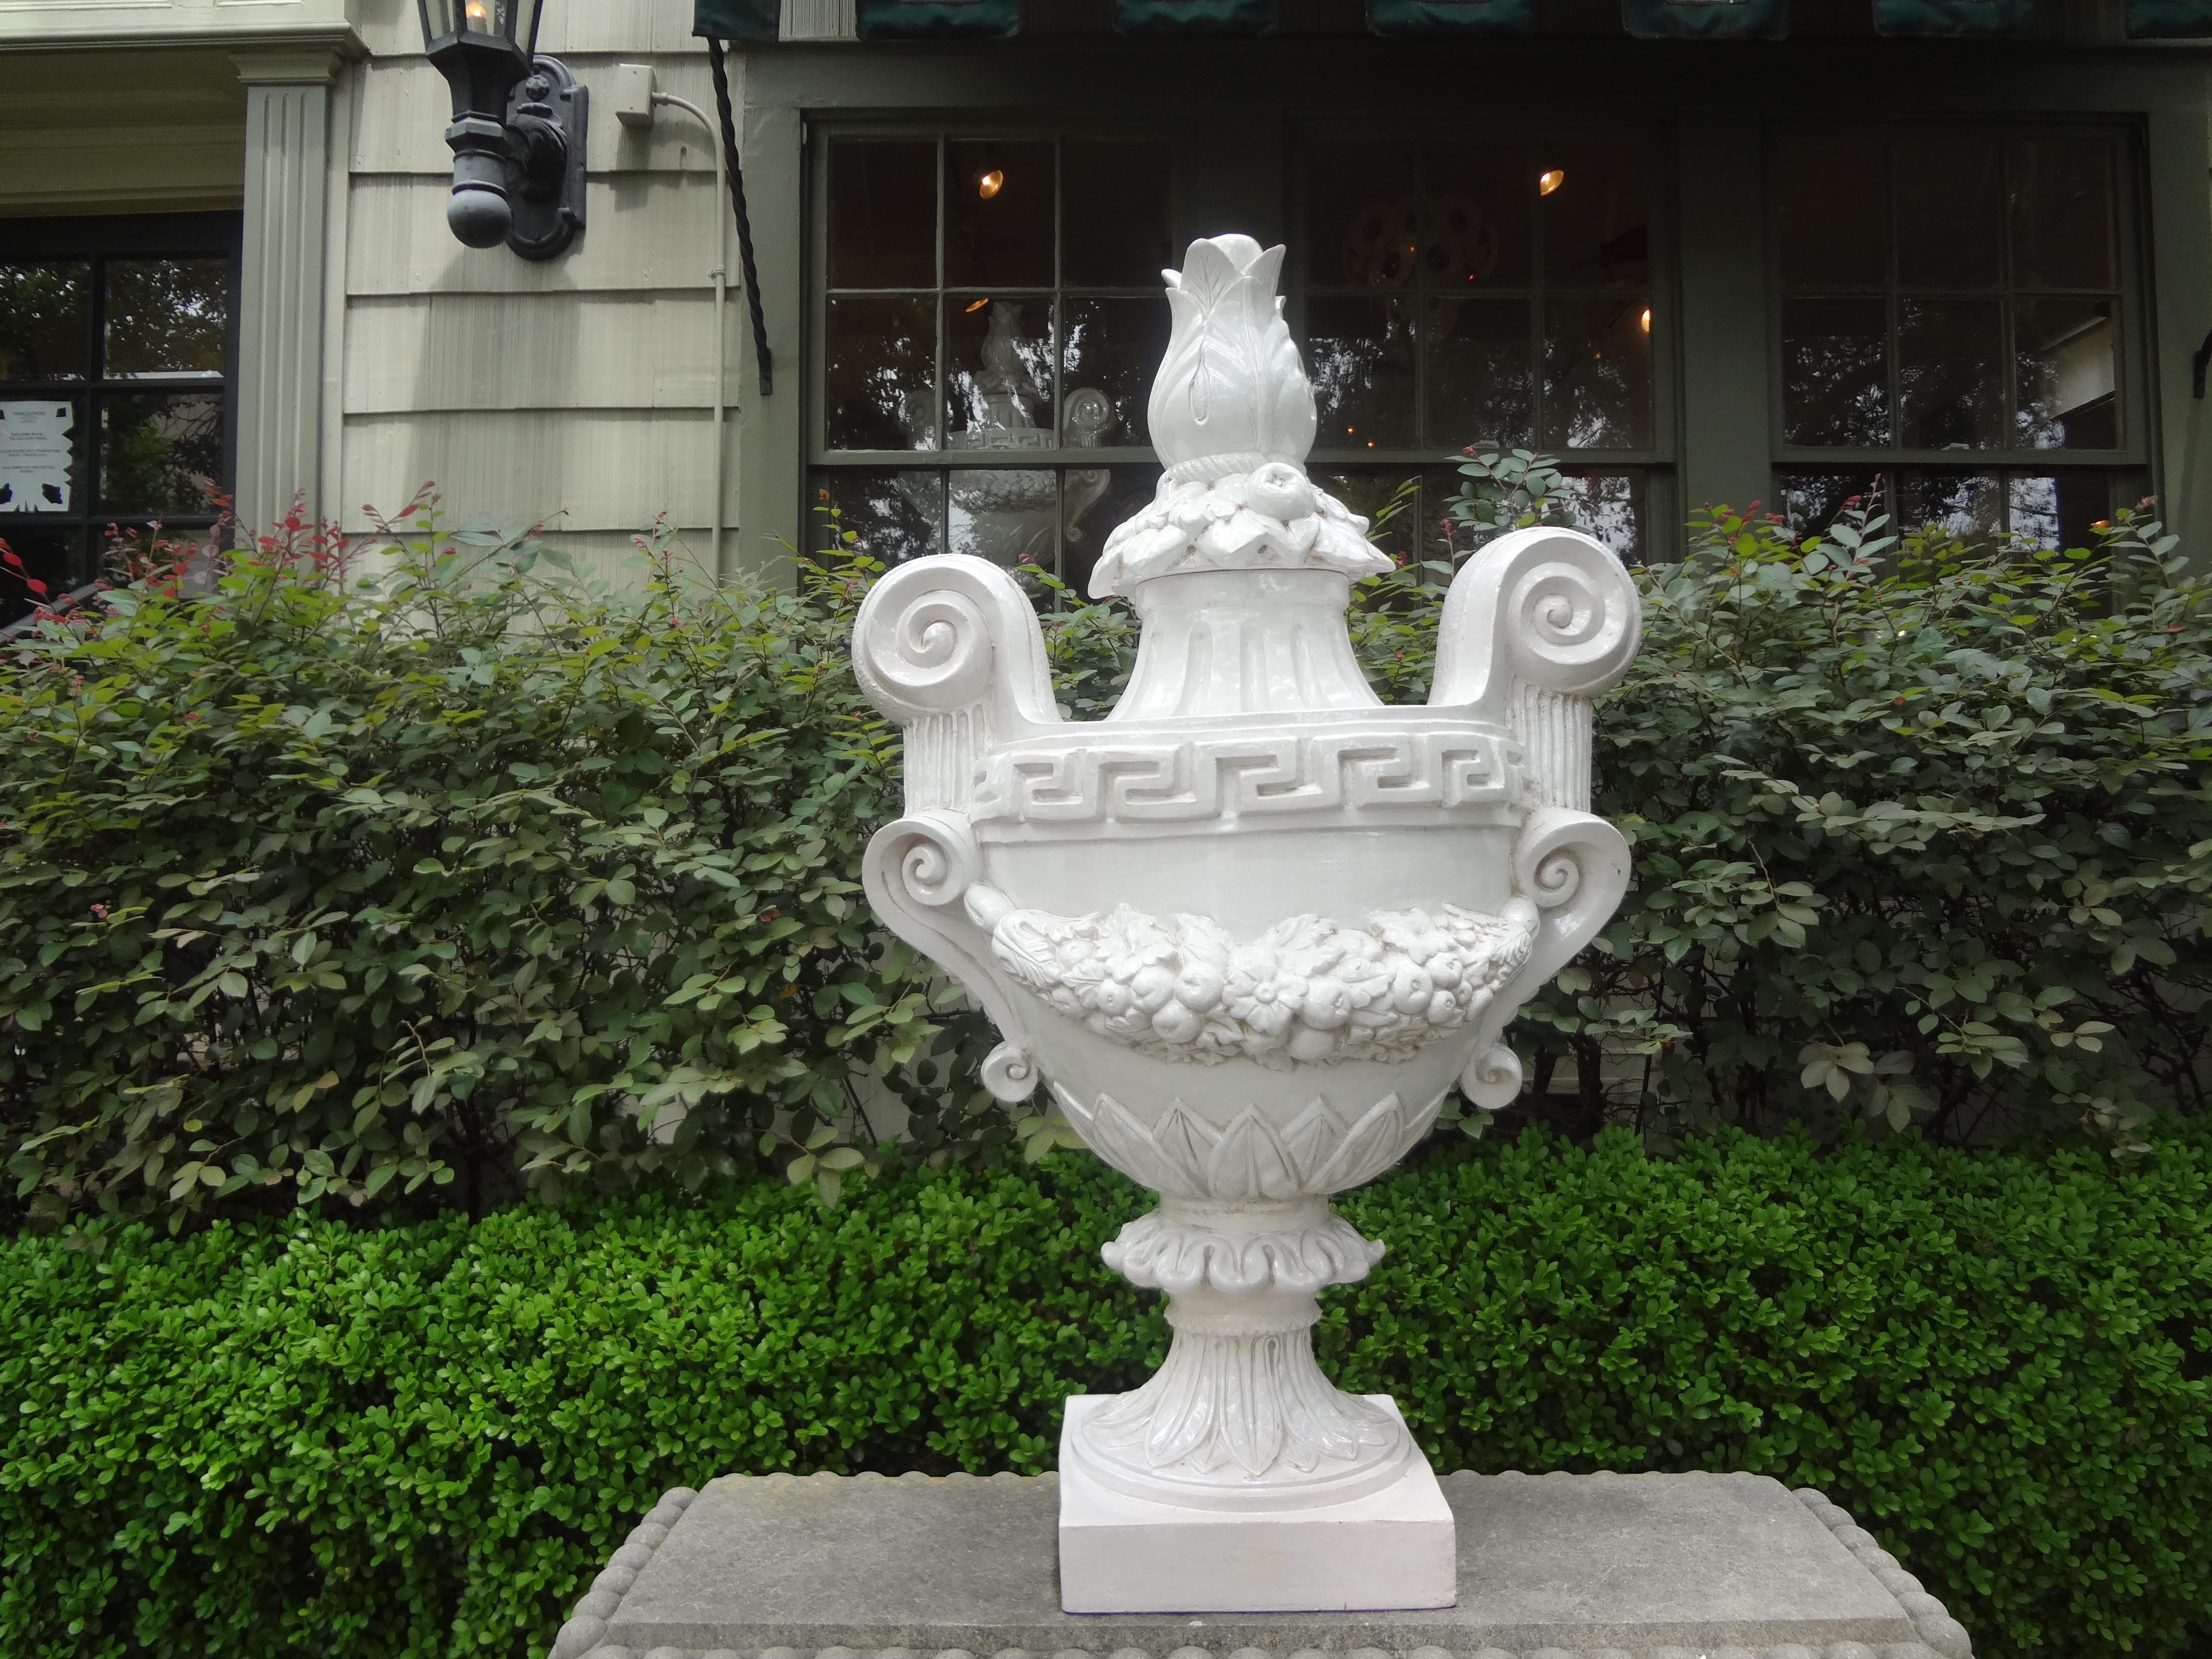 Monumental pair of Italian neoclassical style white glazed terracotta urns with fruit and floral swags and a Greek key design. These magnificent urns come in two parts, the bases and the lids. These stunning large scale urns measure: 37.5 inches in